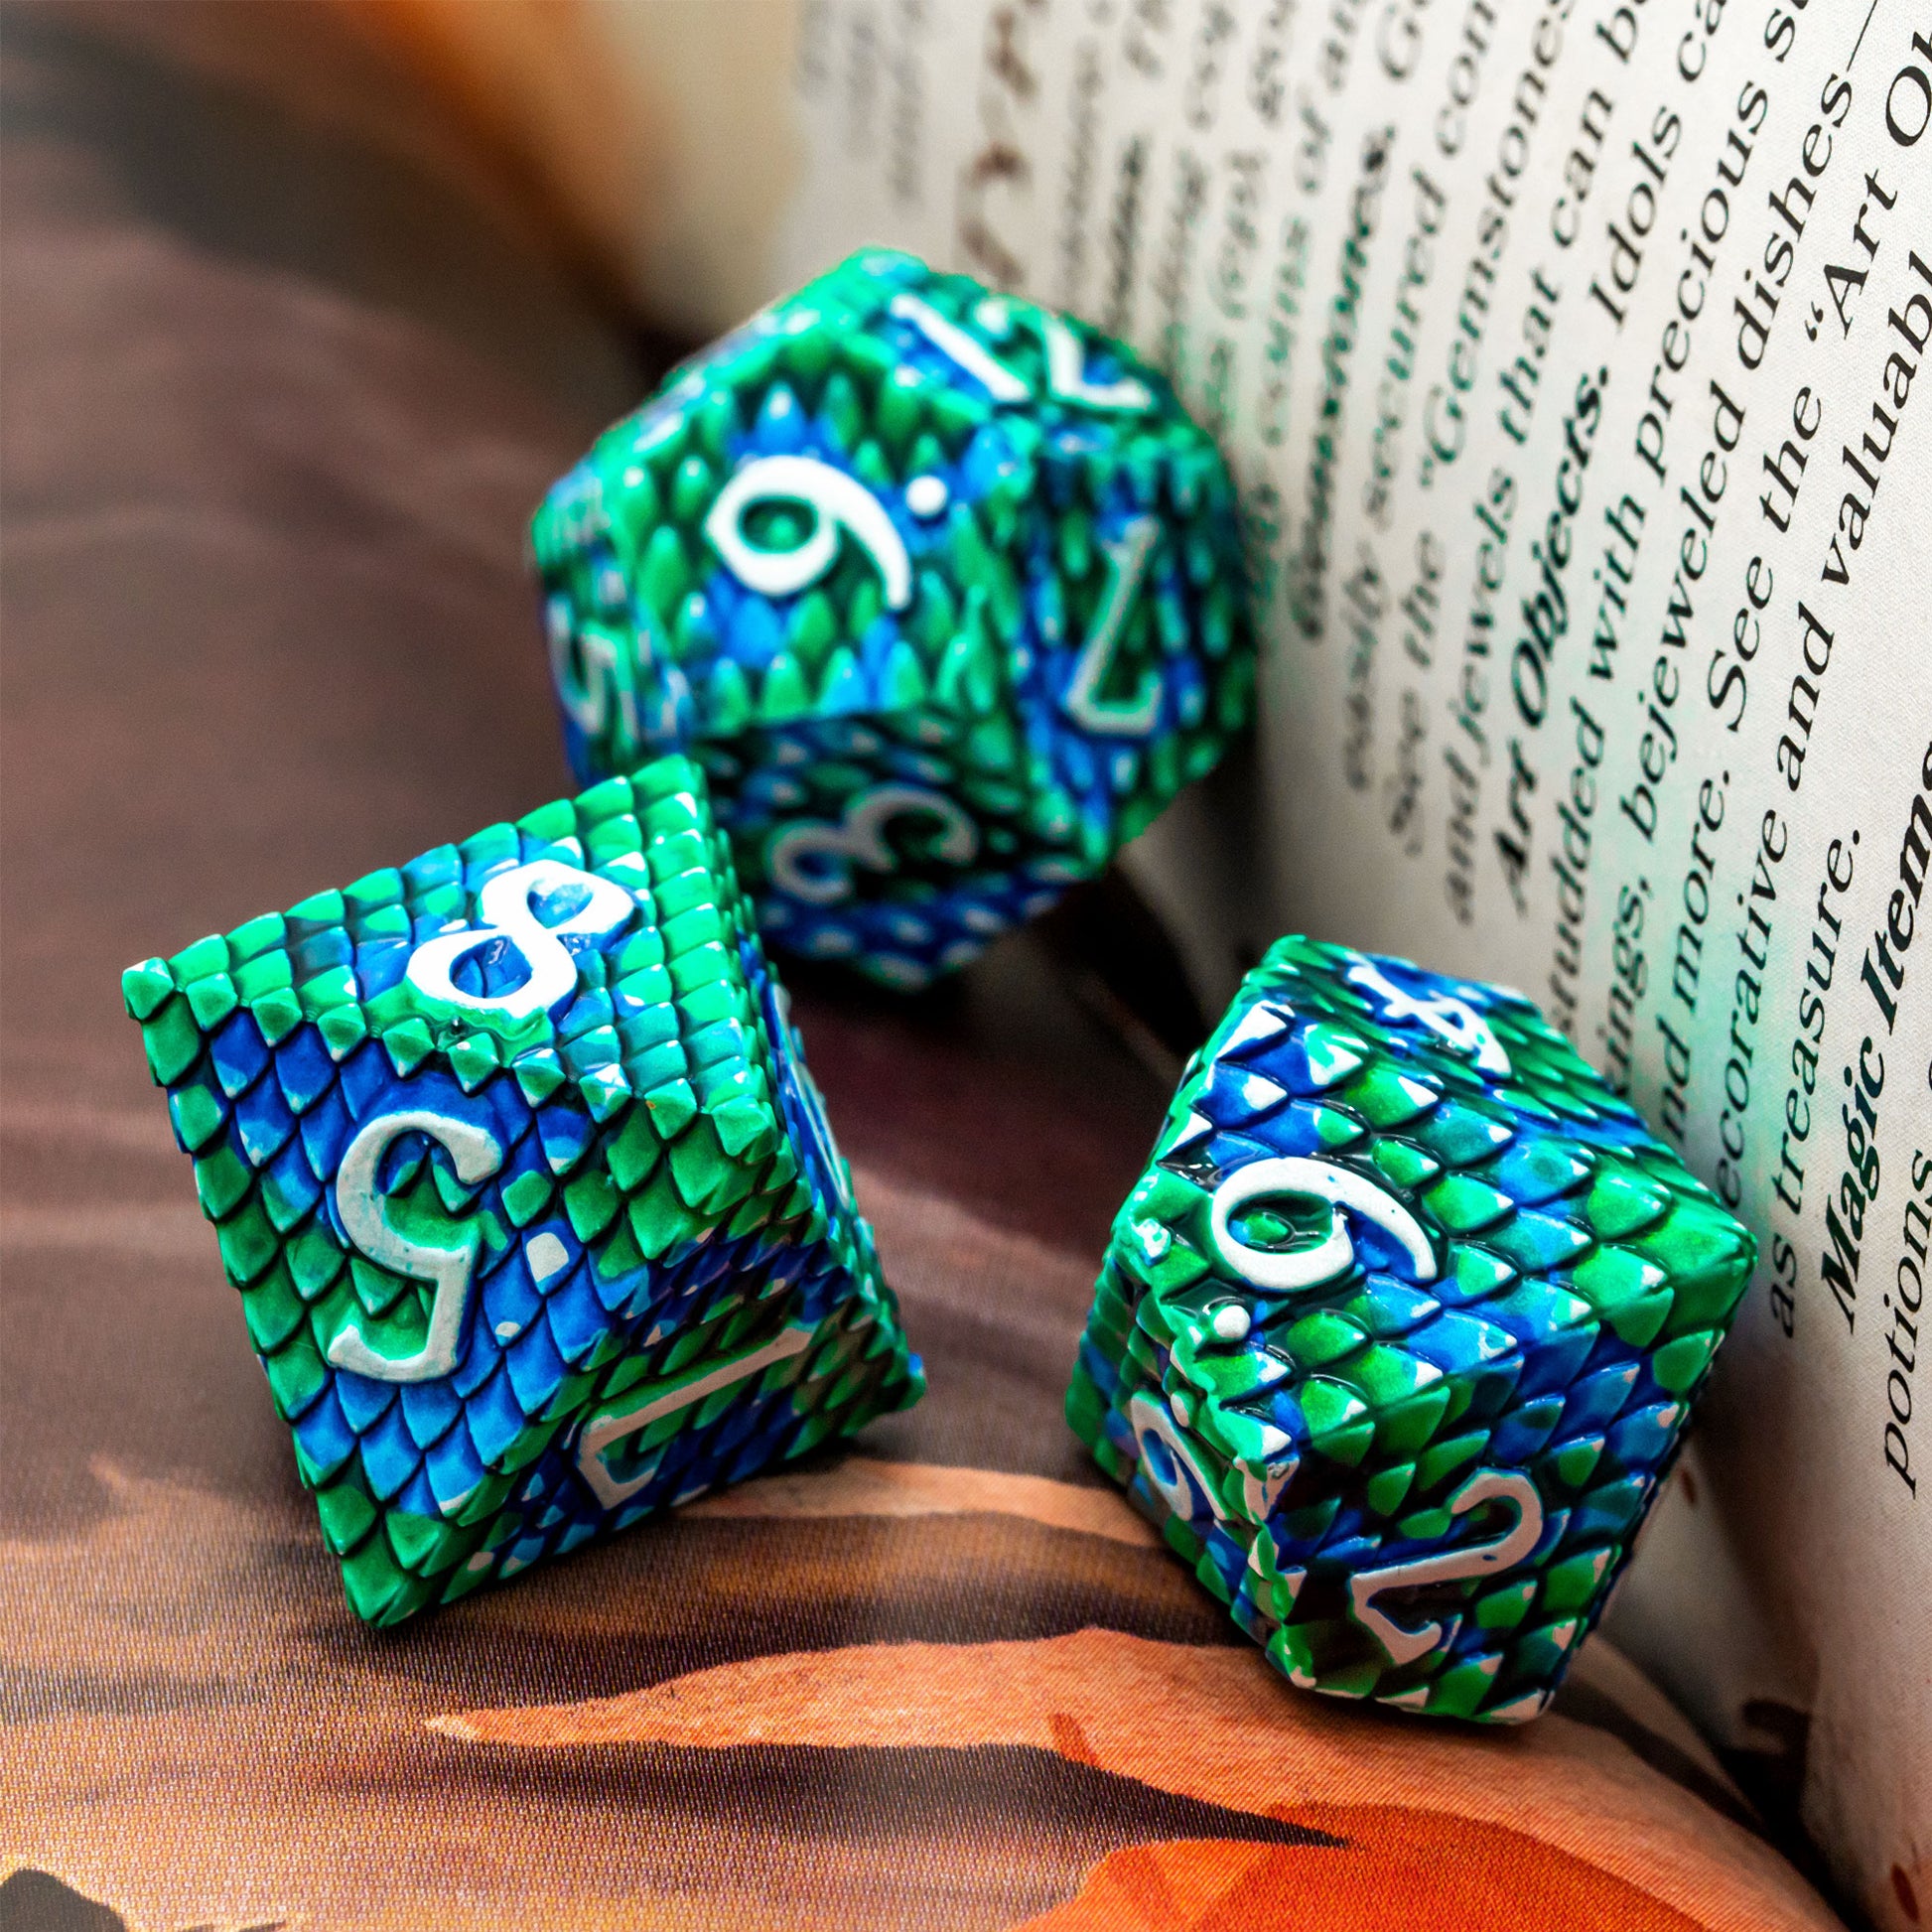 Blue and green dragon scale dice between sheets